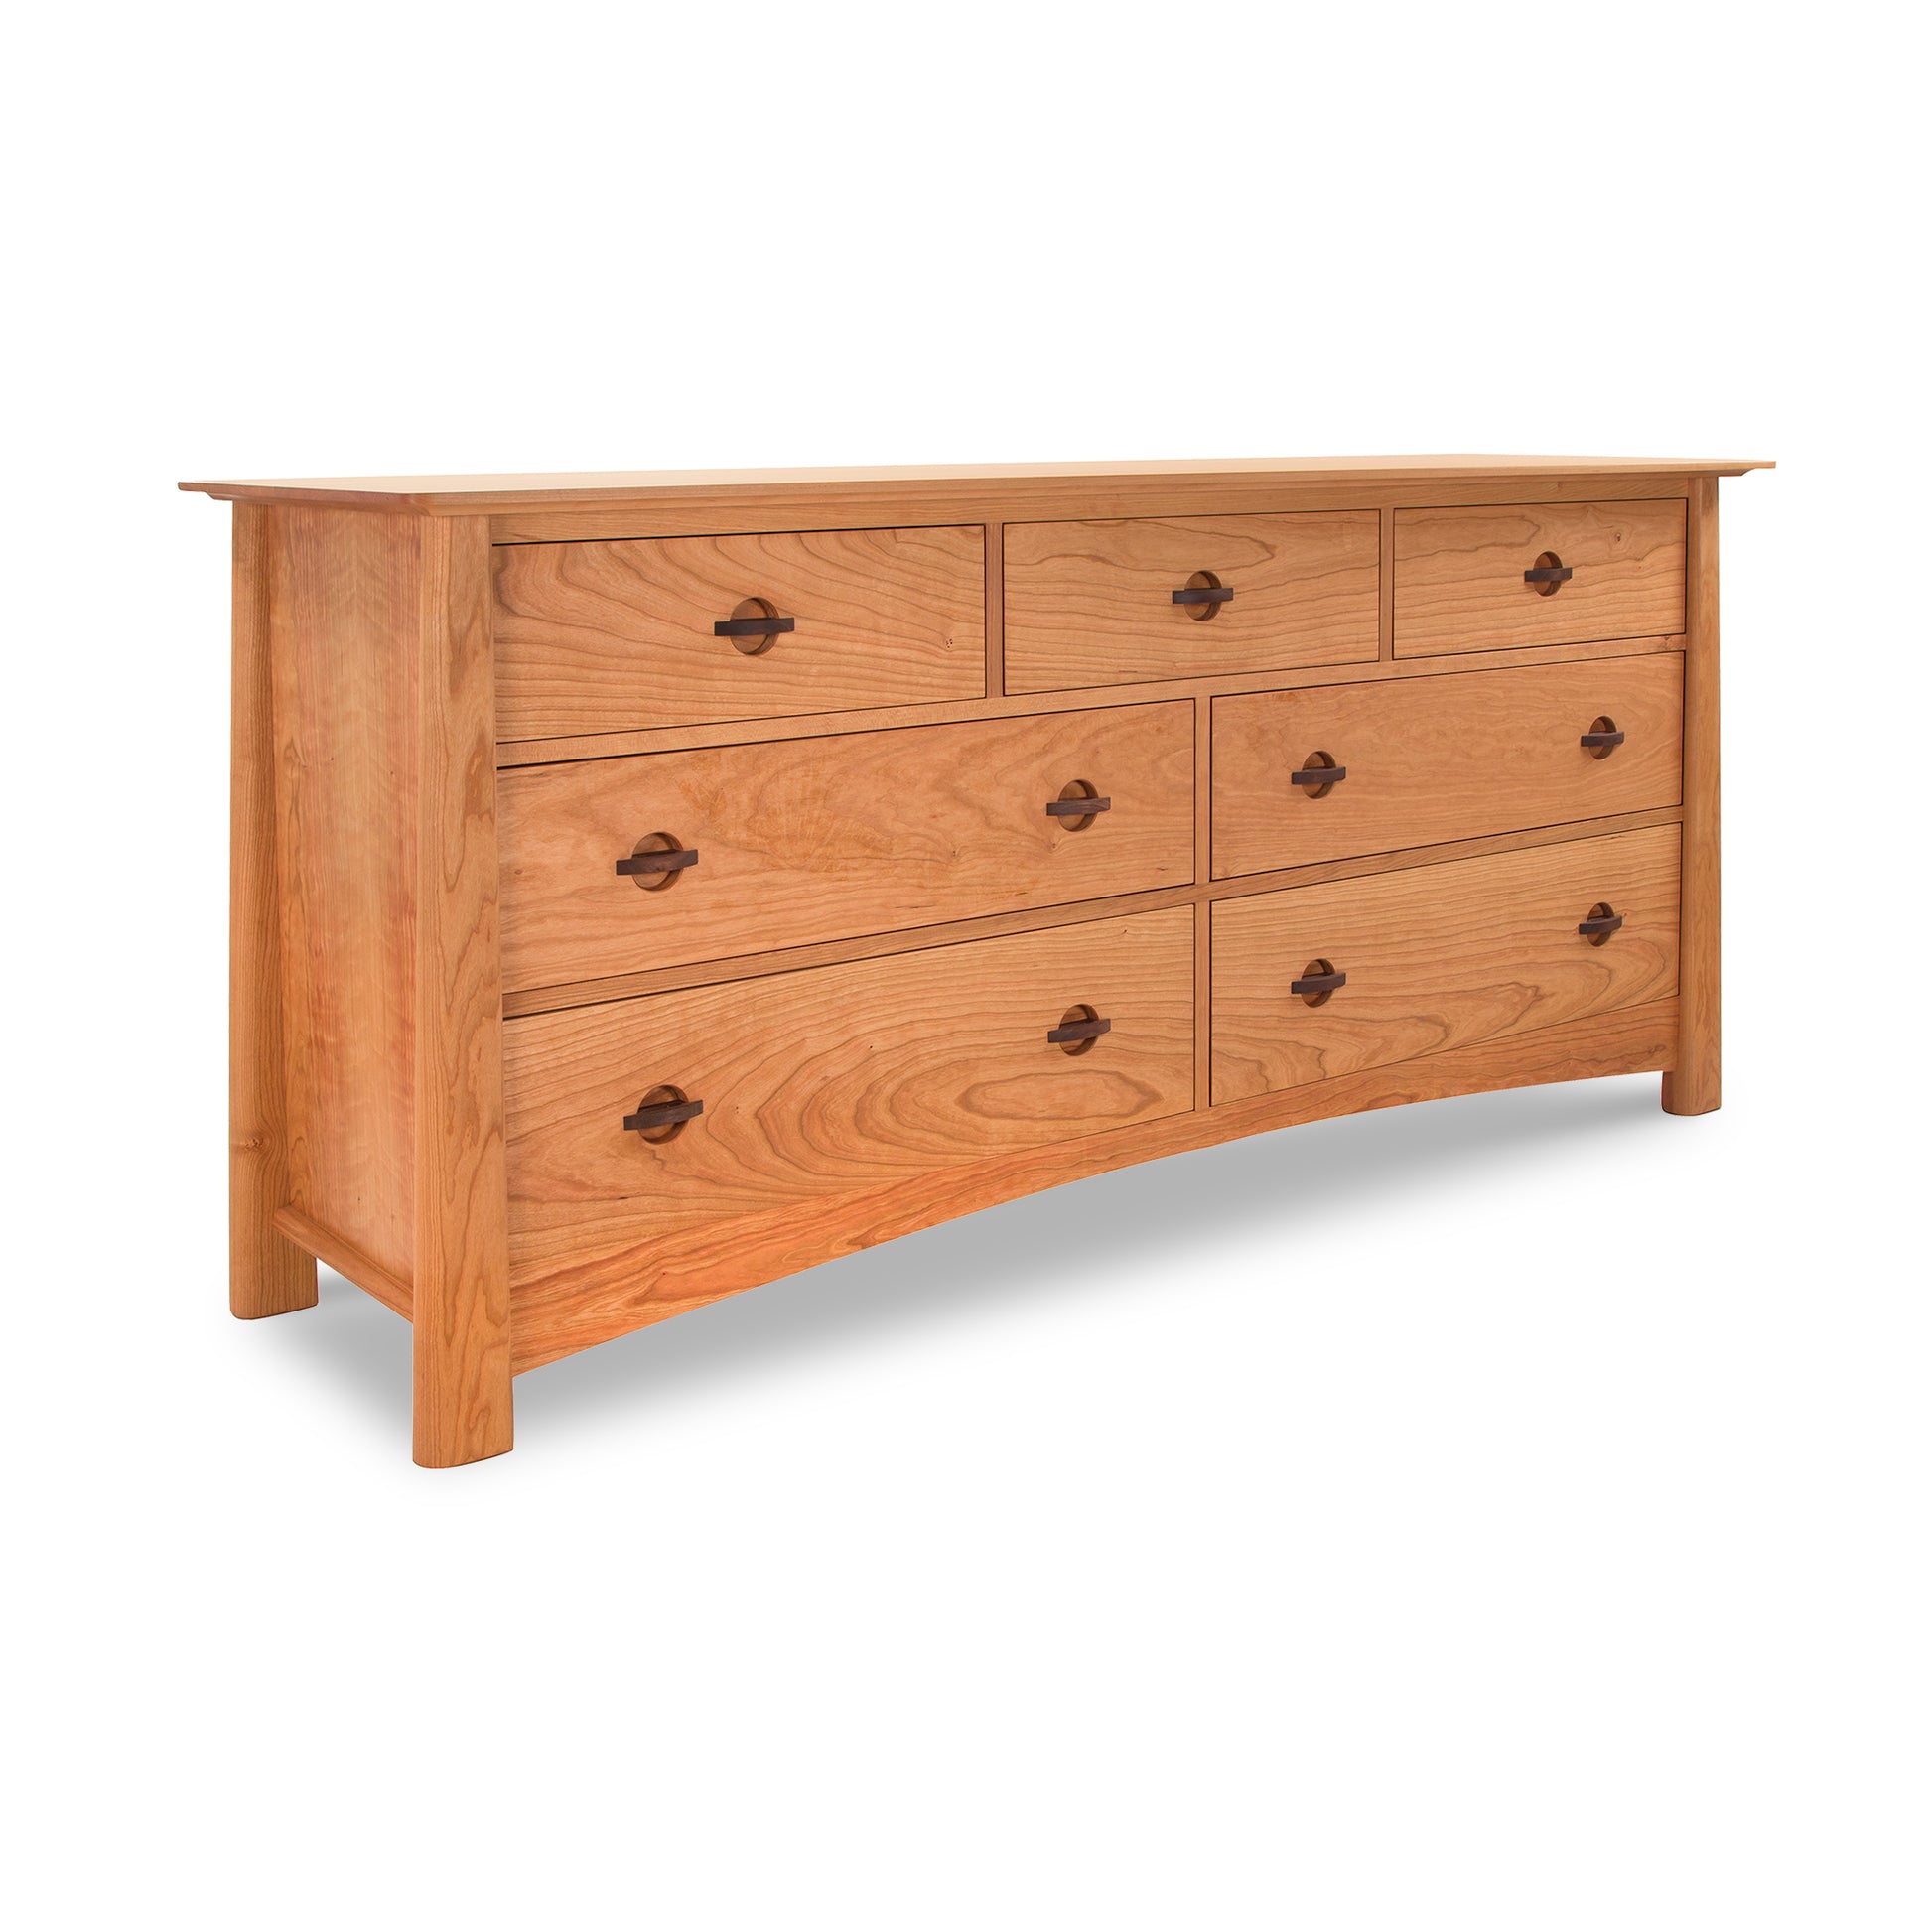 An eco-friendly, handmade wooden dresser with drawers on it. Made from sustainably harvested solid woods and expertly crafted in Vermont. Introducing the Maple Corner Woodworks Cherry Moon 7-Drawer Dresser.